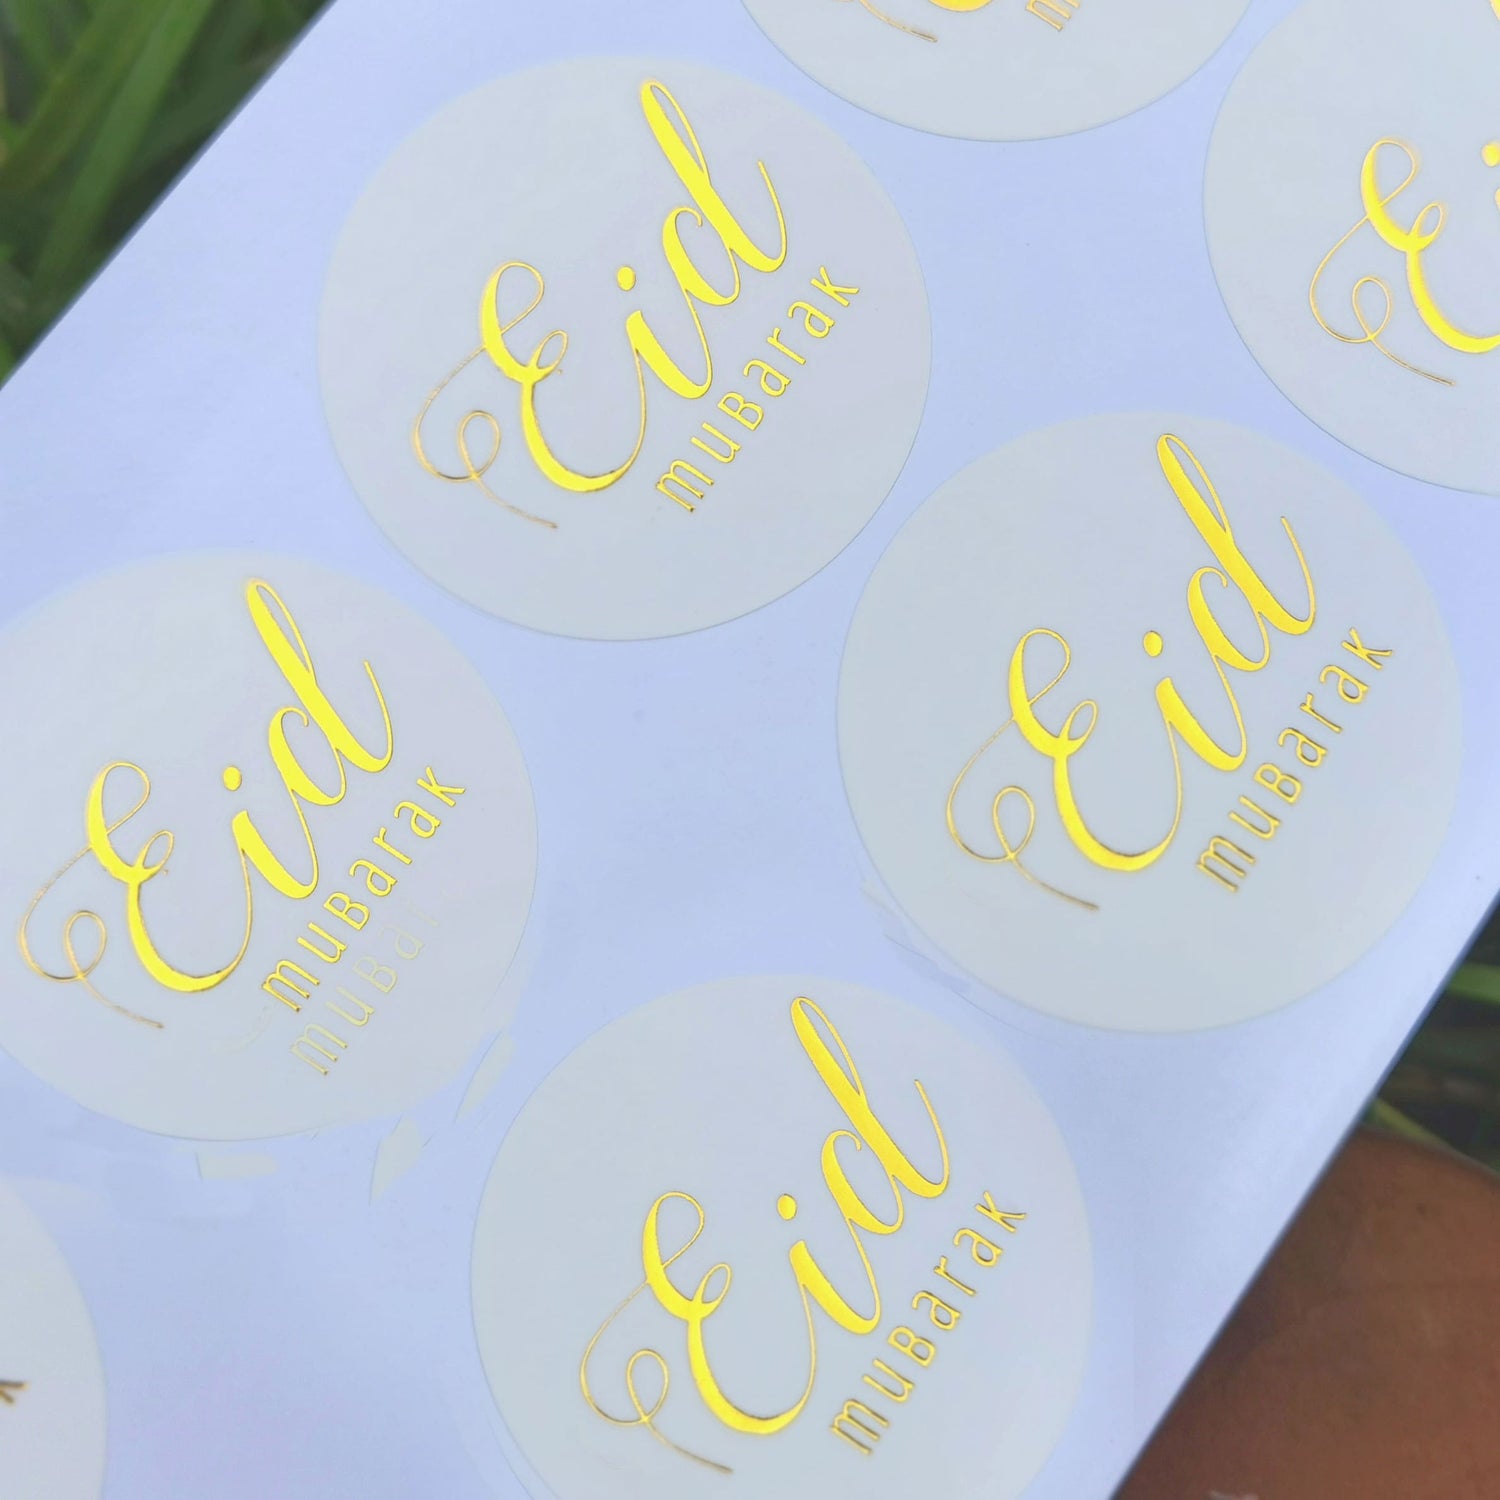 Eid Mubarak Stickers | Dore Stickers | Gold and white stickers | Eid Decorations 